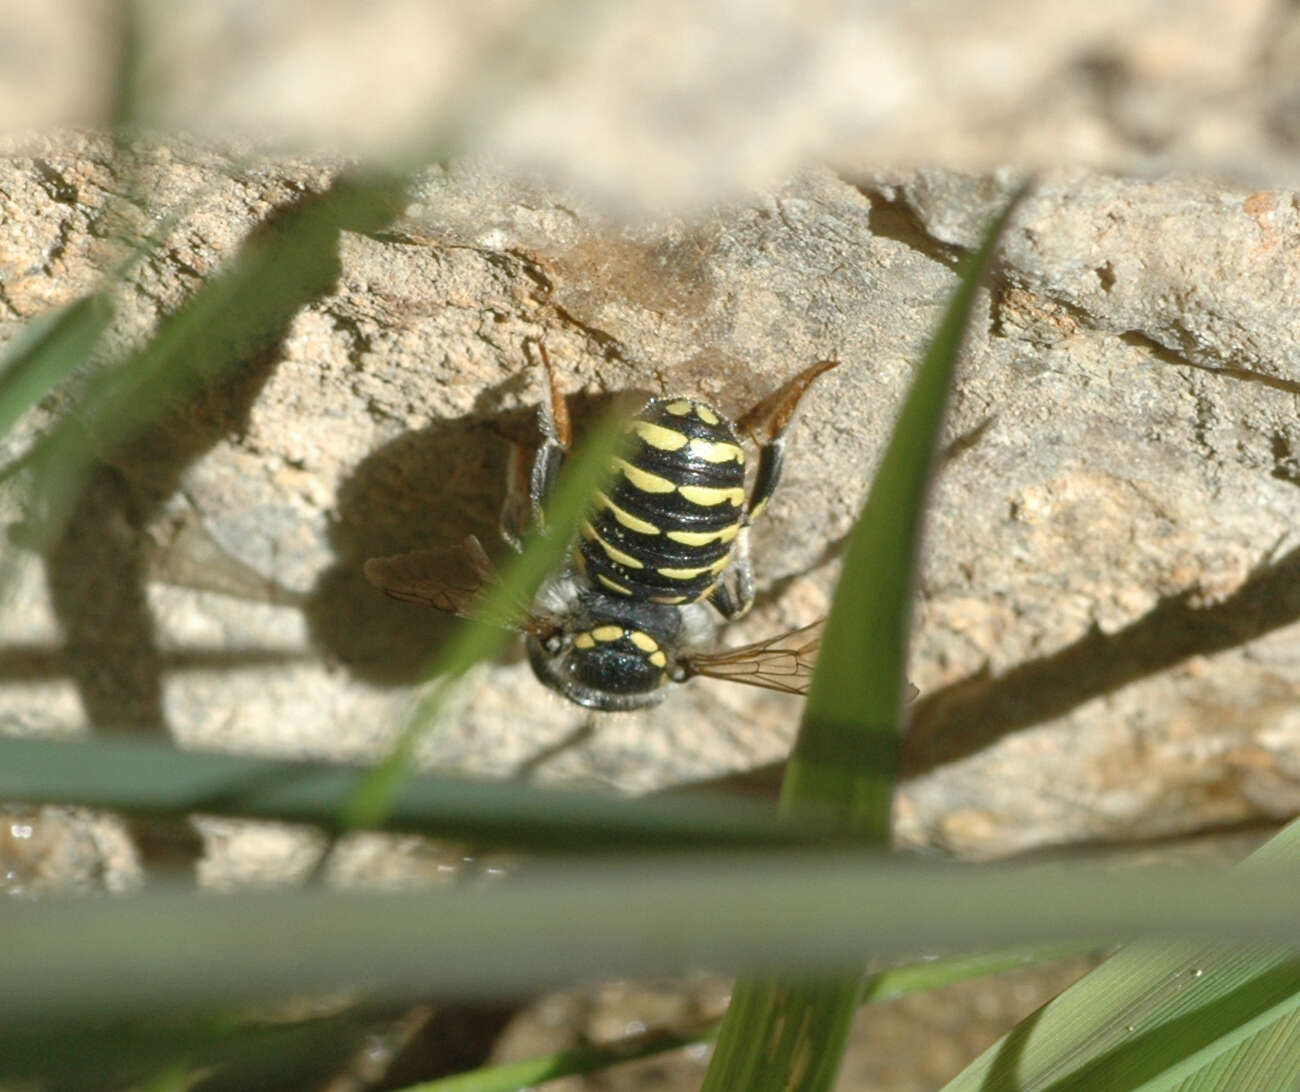 Image of Spot-fronted Wool-carder Bee